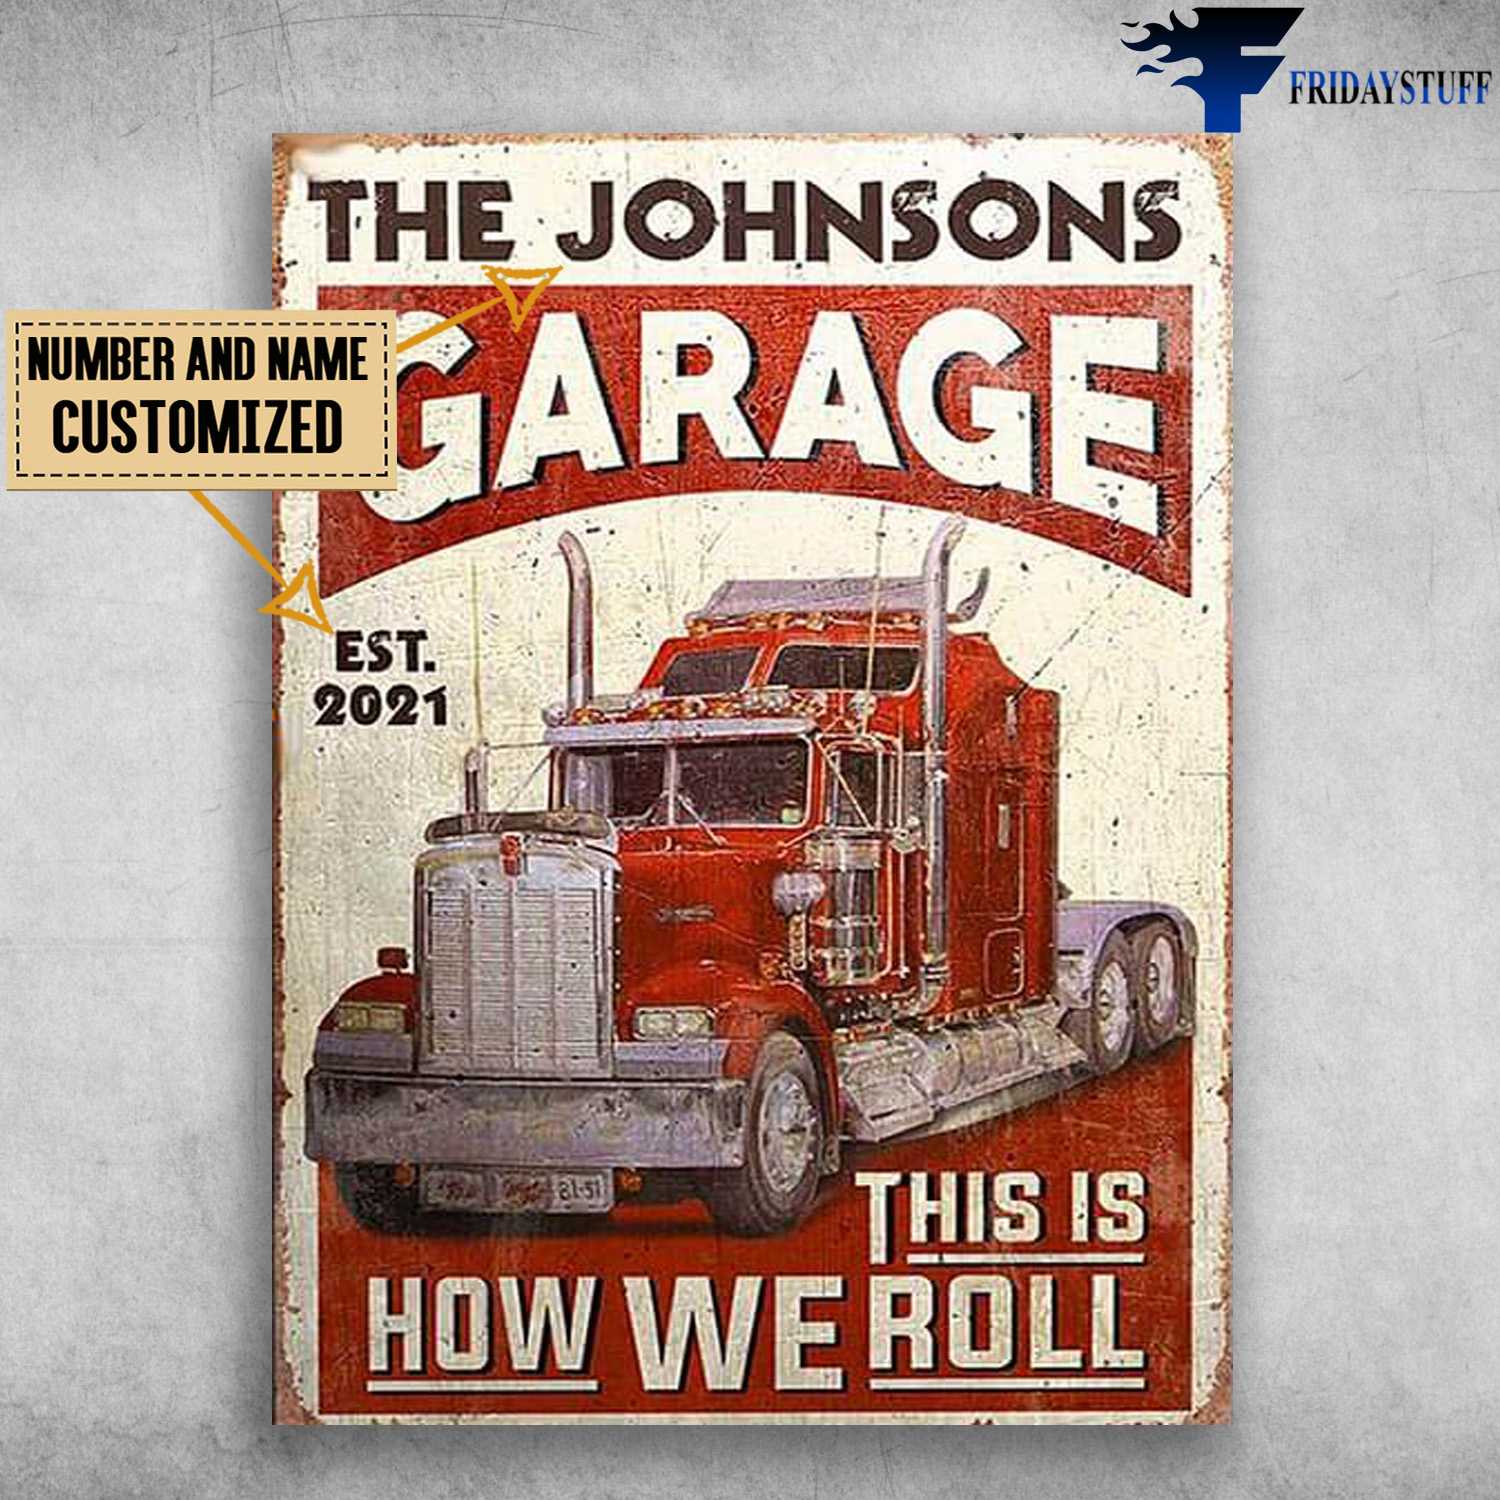 Trucker Poster, Garage Truck, This Is How We Roll